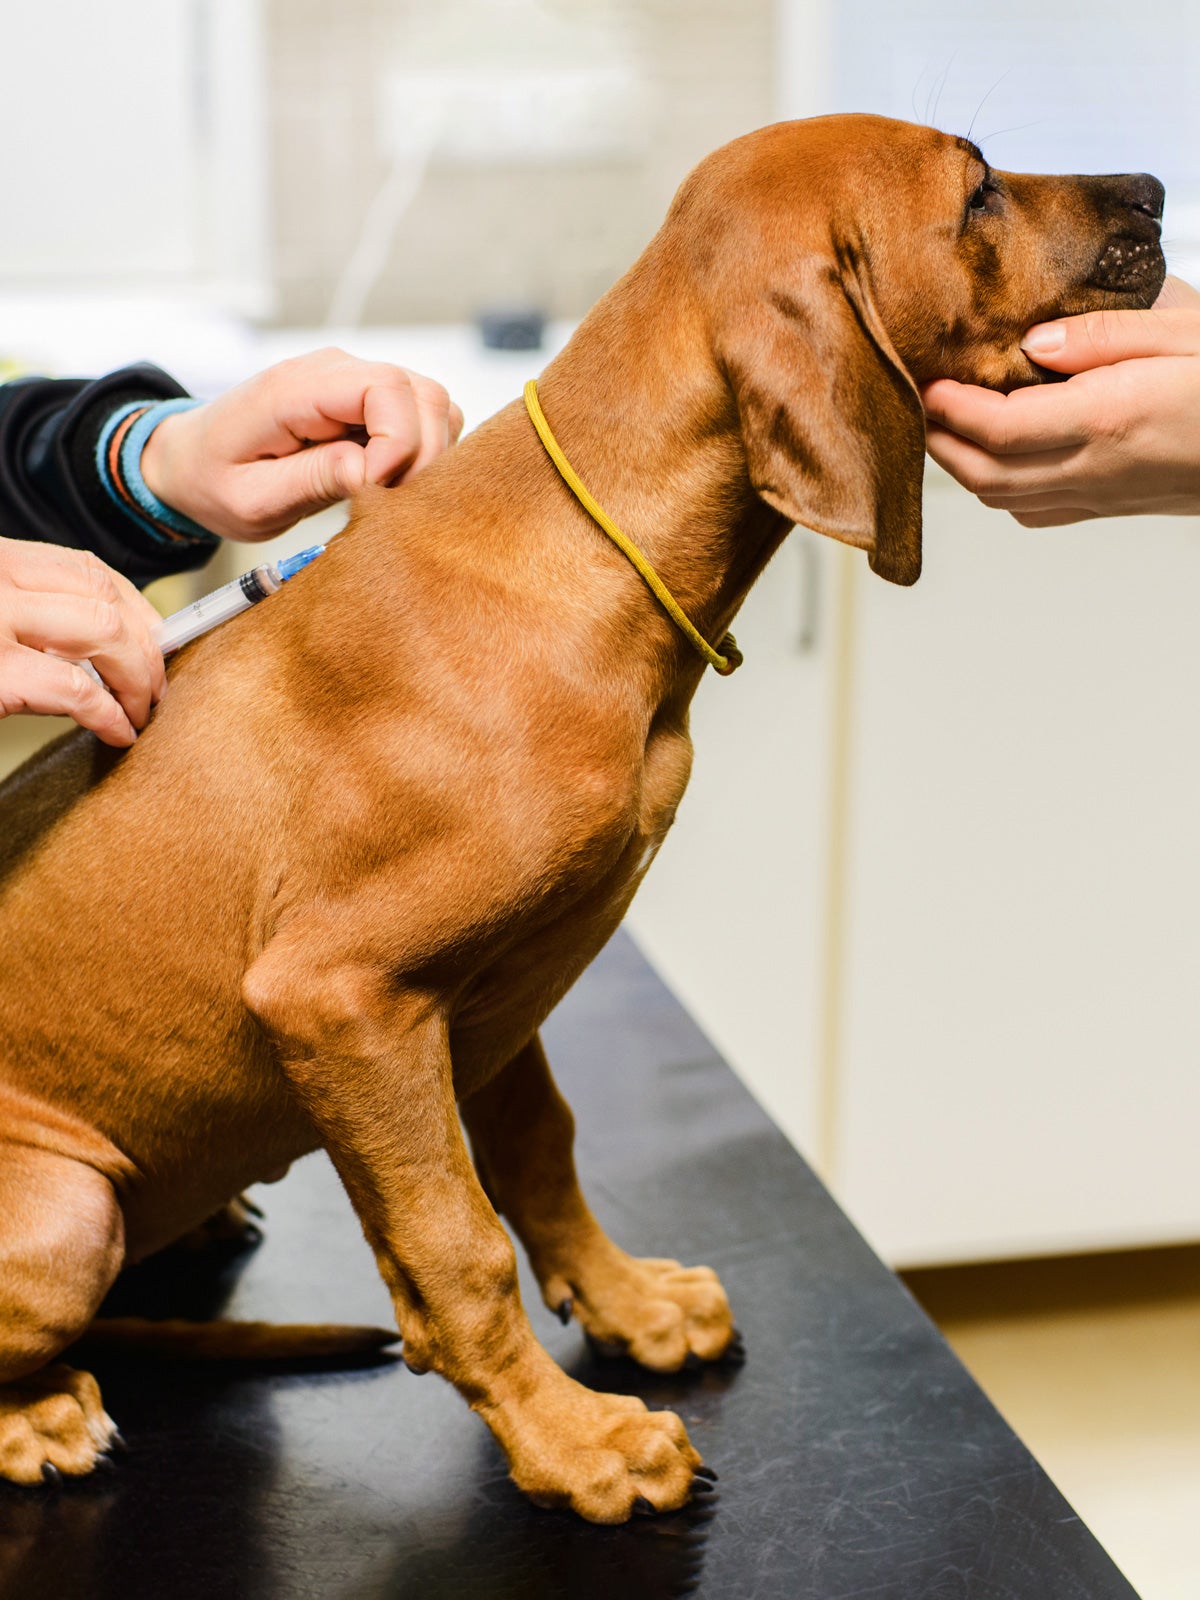 Rhodesian ridgeback puppy sits on a black table and receives a vaccination in vet clinic. A owner or aide holds the puppy’s face.